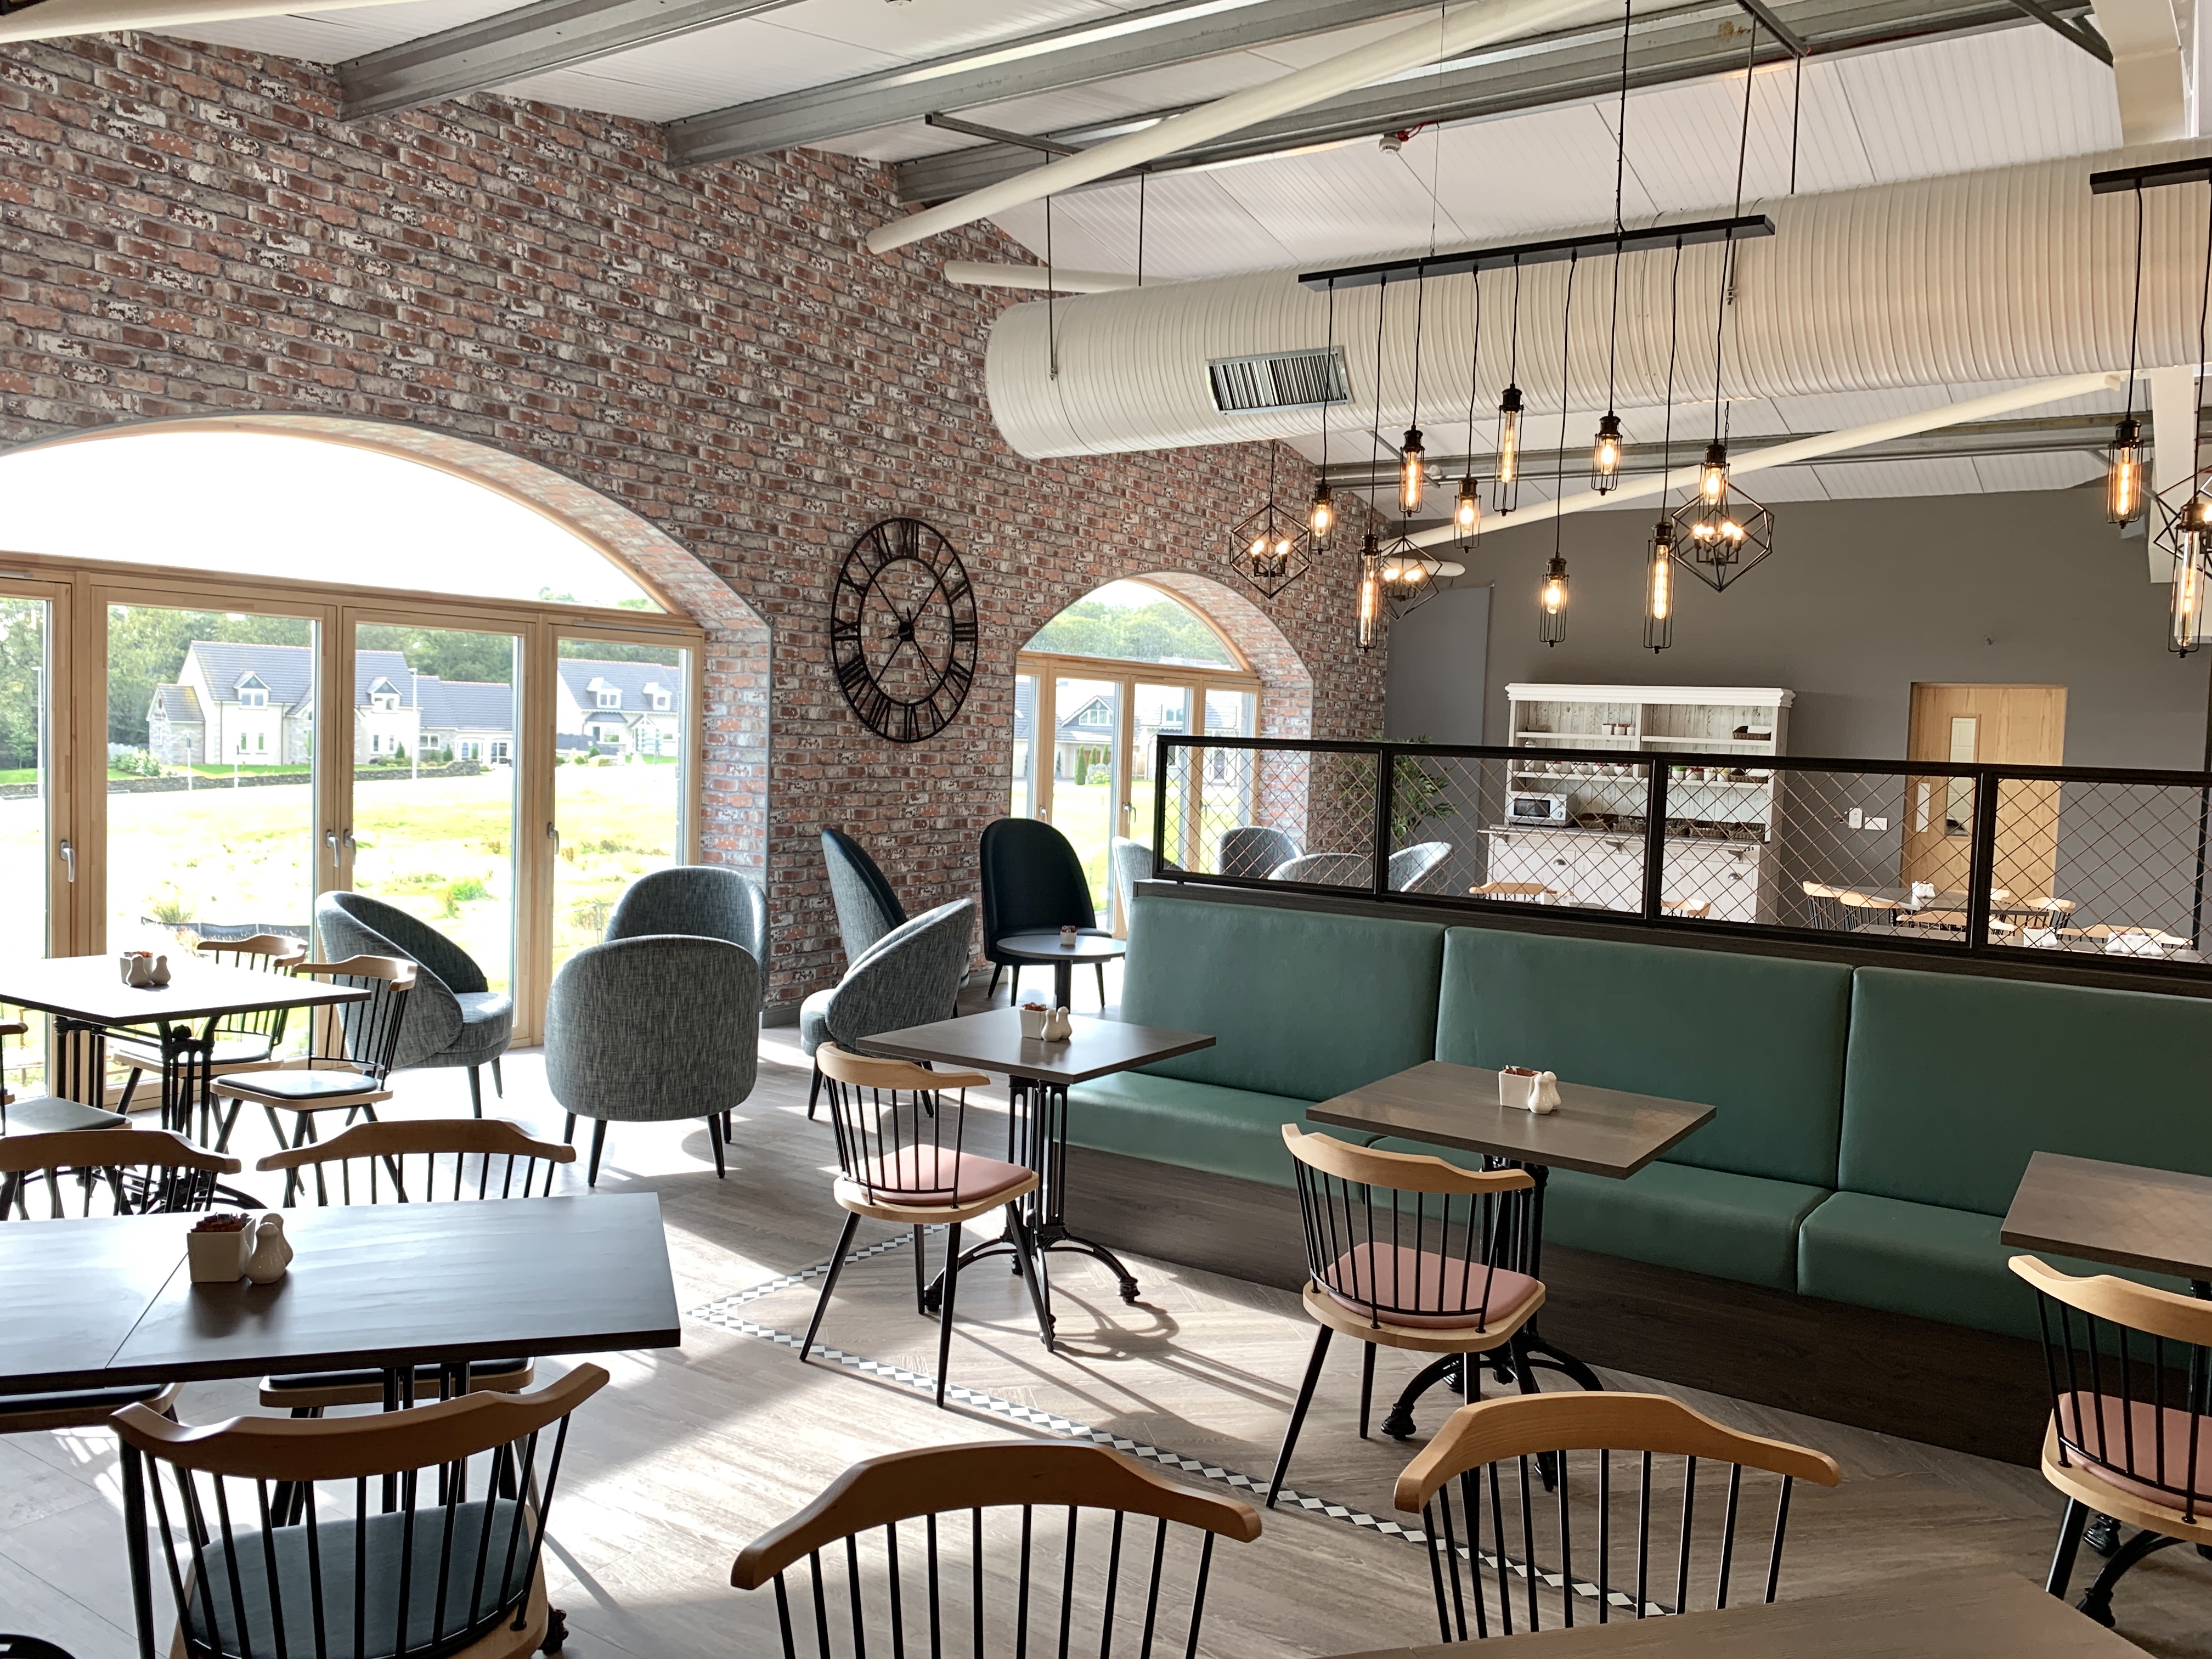 Aberdeenshire furniture store opens new coffee shop and accessories